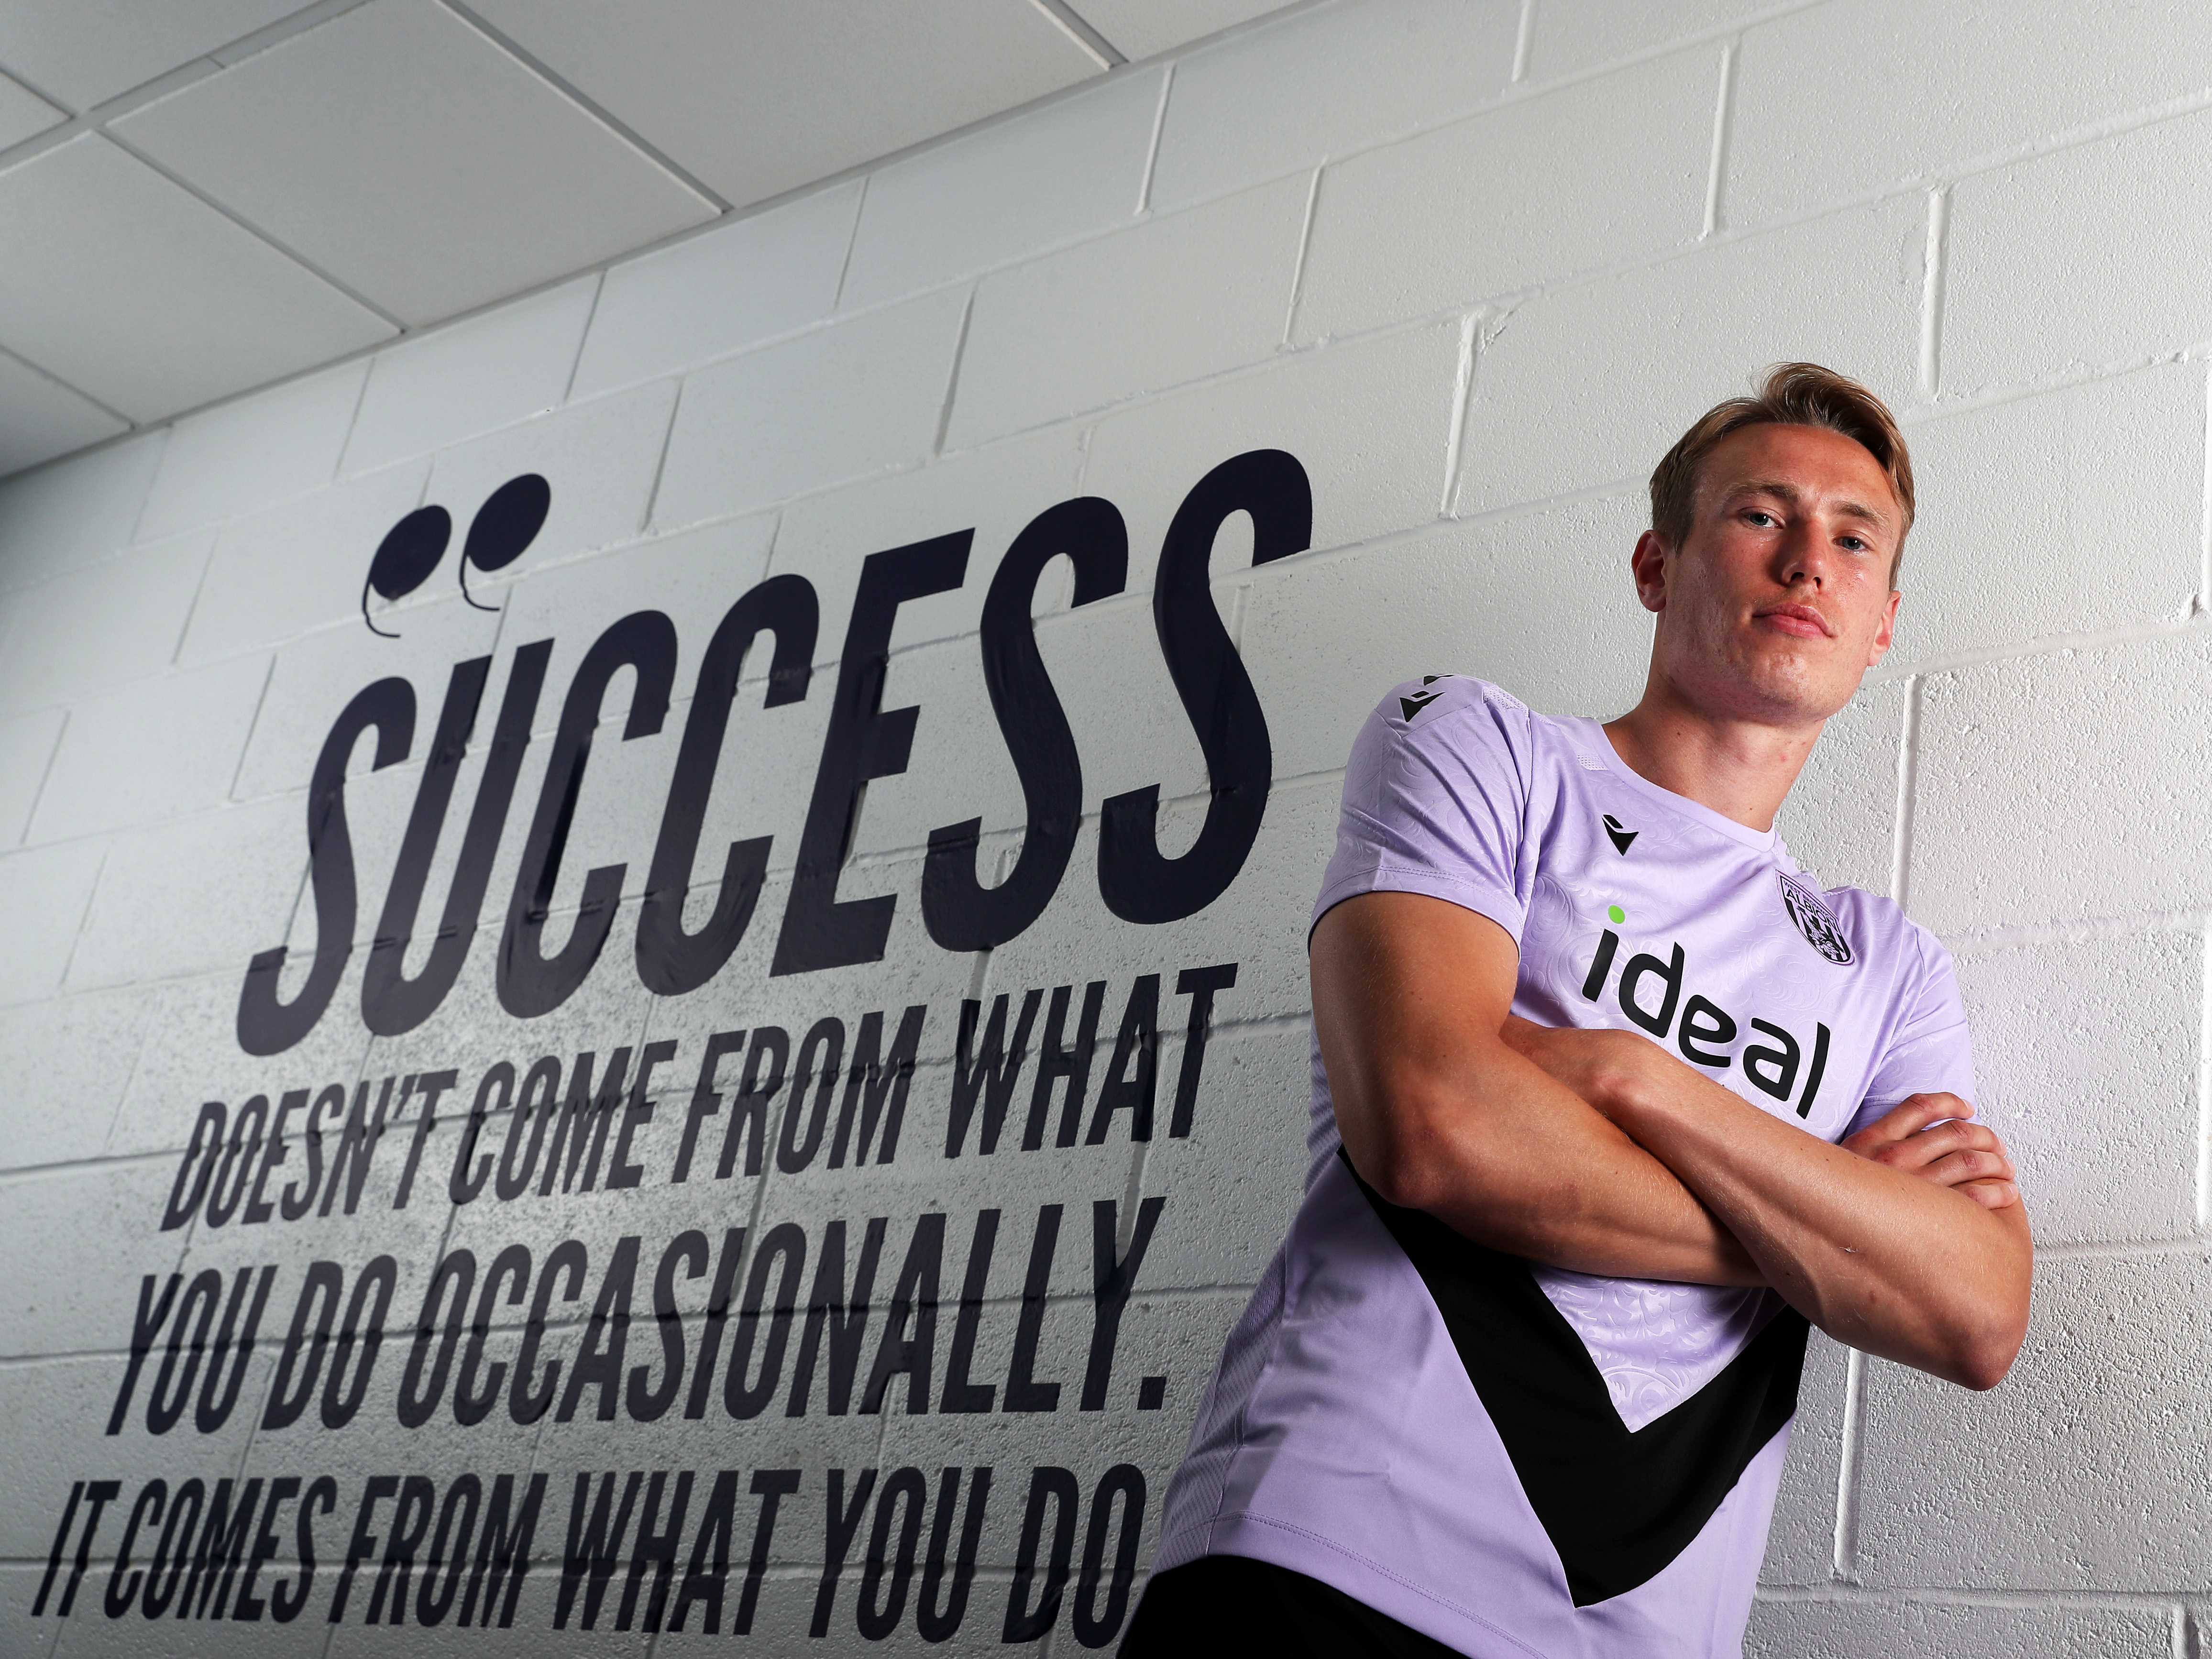 Torbjørn Heggem posing for a photo while stood against a wall with motivational writing on